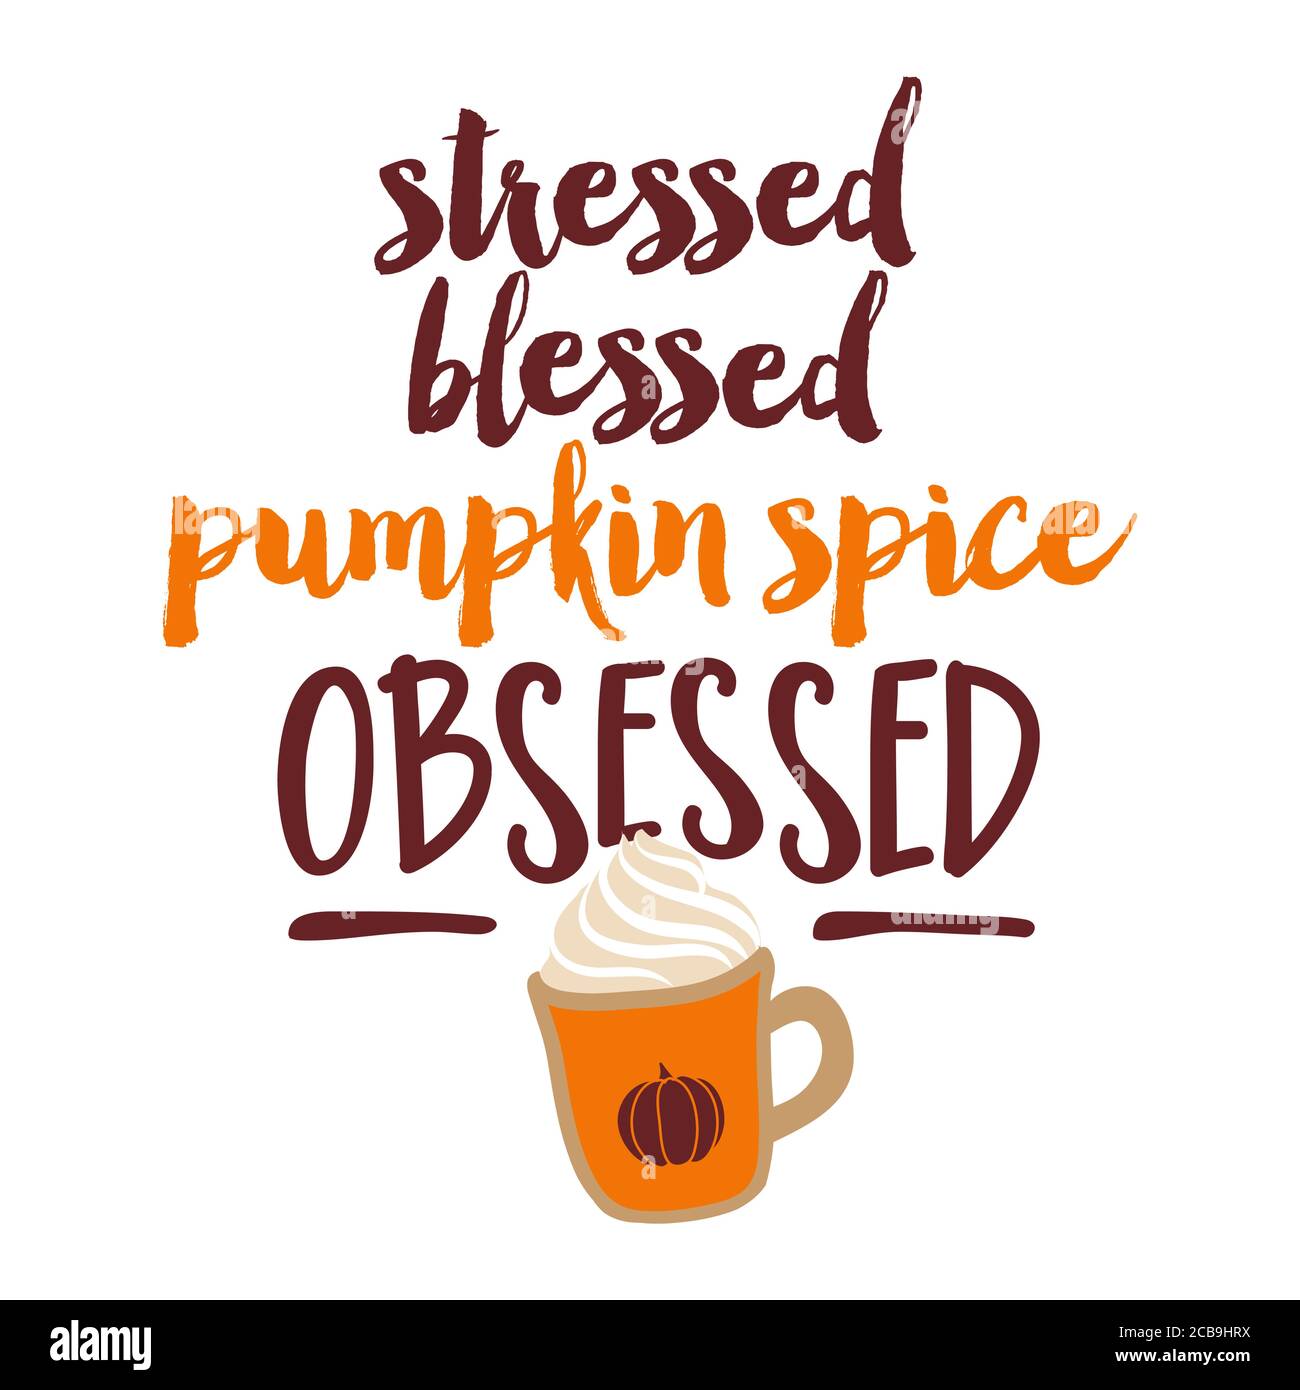 Stressed, Blessed, Pumpkin Spice Obsessed - Hand drawn vector illustration with pupkin spice latte. Autumn color poster. Good for posters, greeting ca Stock Vector